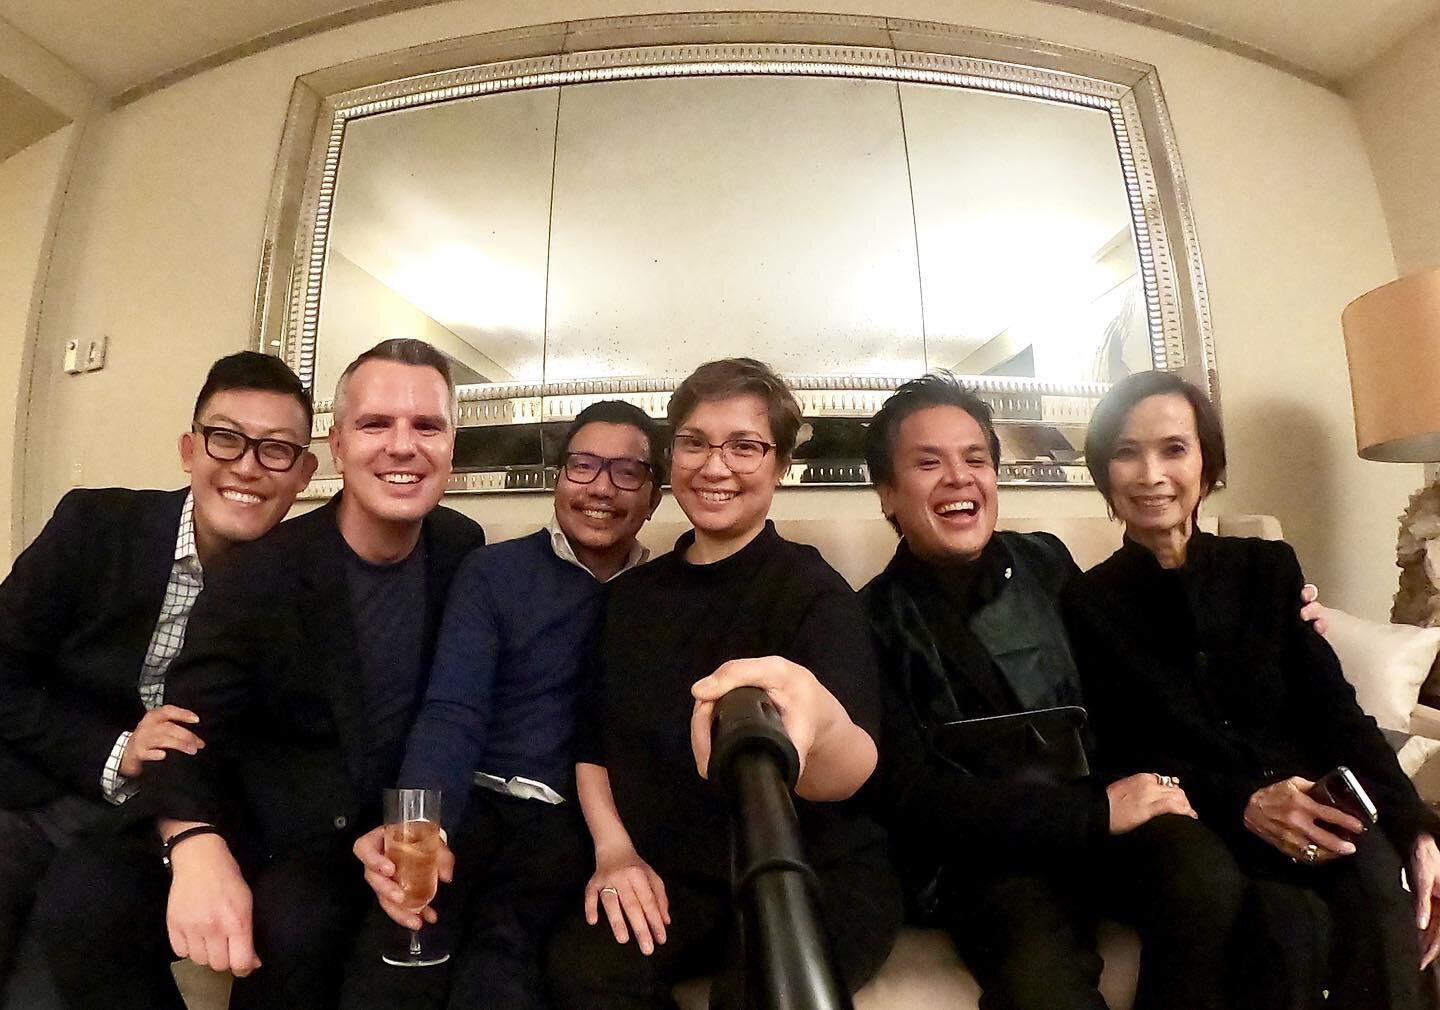 🇵🇭 Honorary Pinoy among Filipino royalty 👑 A magical evening with our Disney Princess @msleasalonga hosted by the queen herself @josienatori. 👗 Drinks, Duck, Flan, Singalongs and Selfies, could not have asked for more. 🎵 #onlyinnewyork #dreamsco